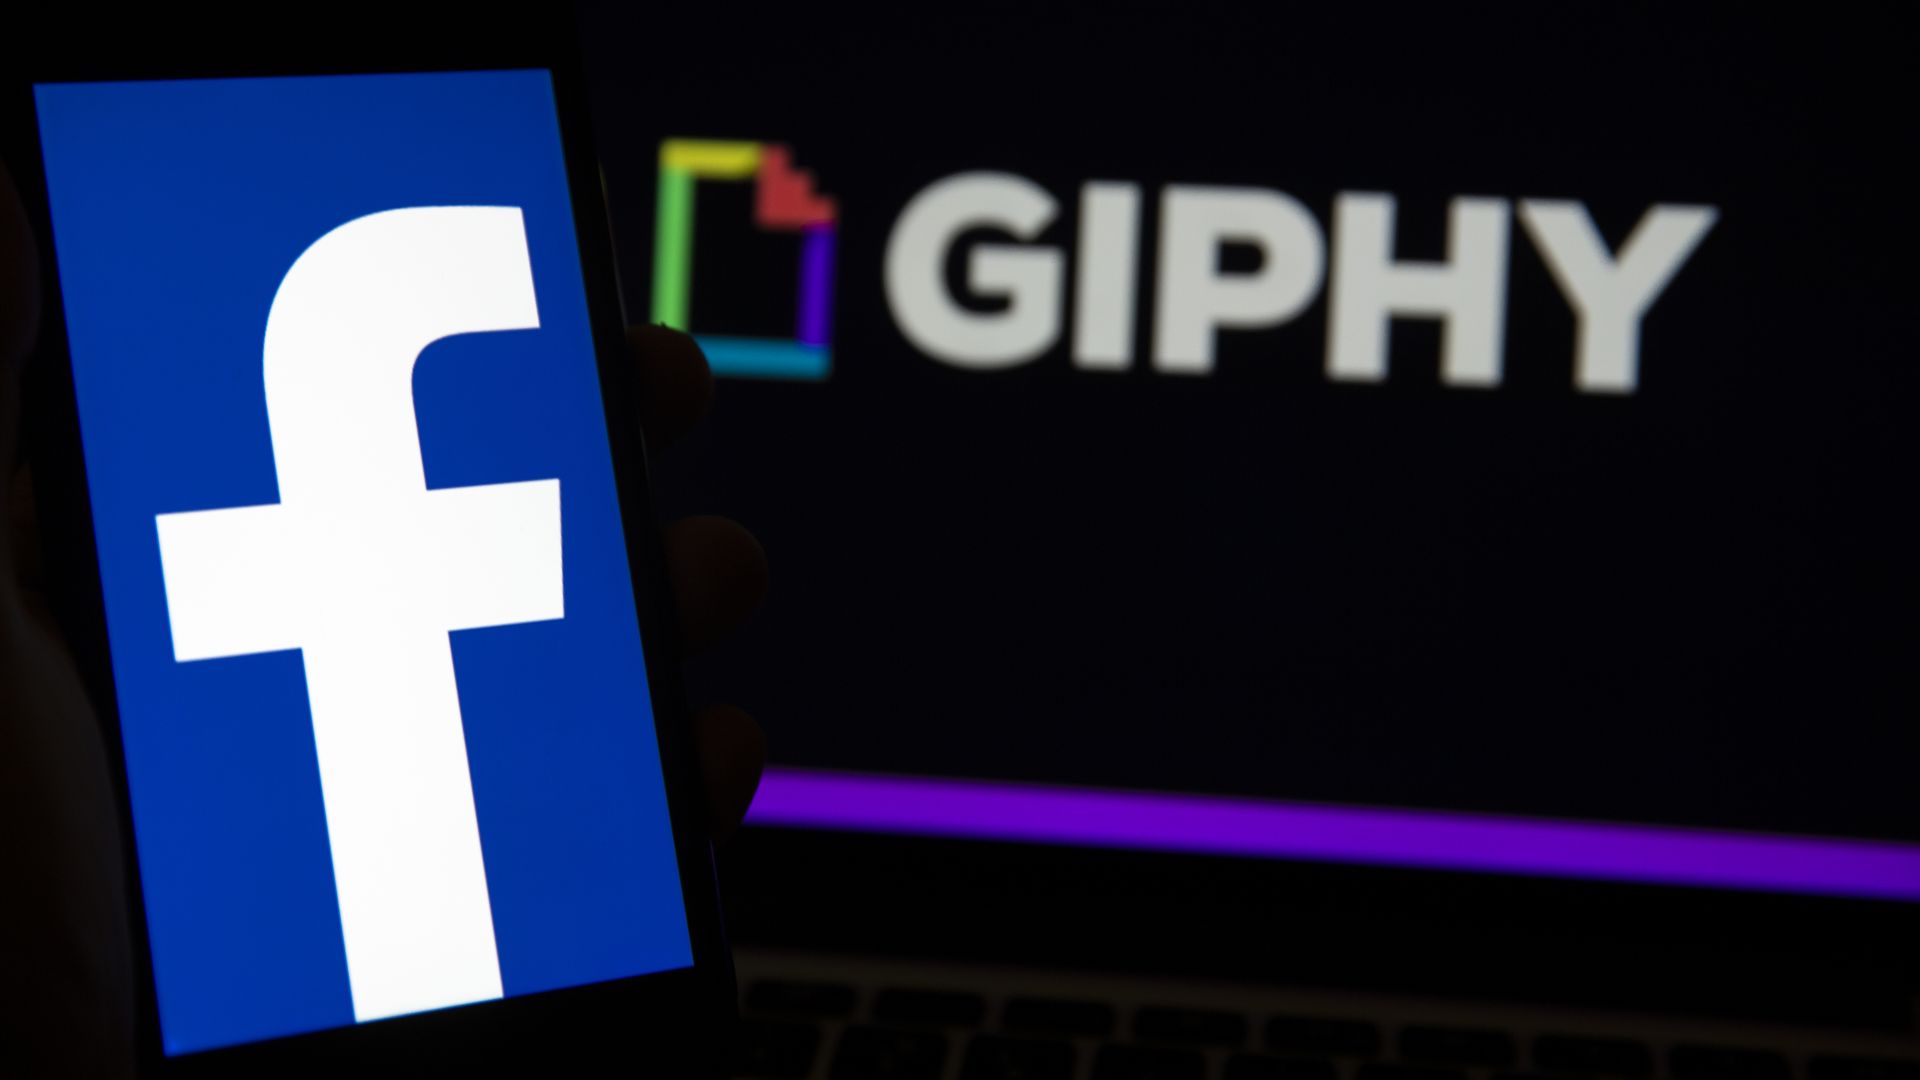 A photo illustration of the Facebook and Giphy logos on a laptop and mobile screen